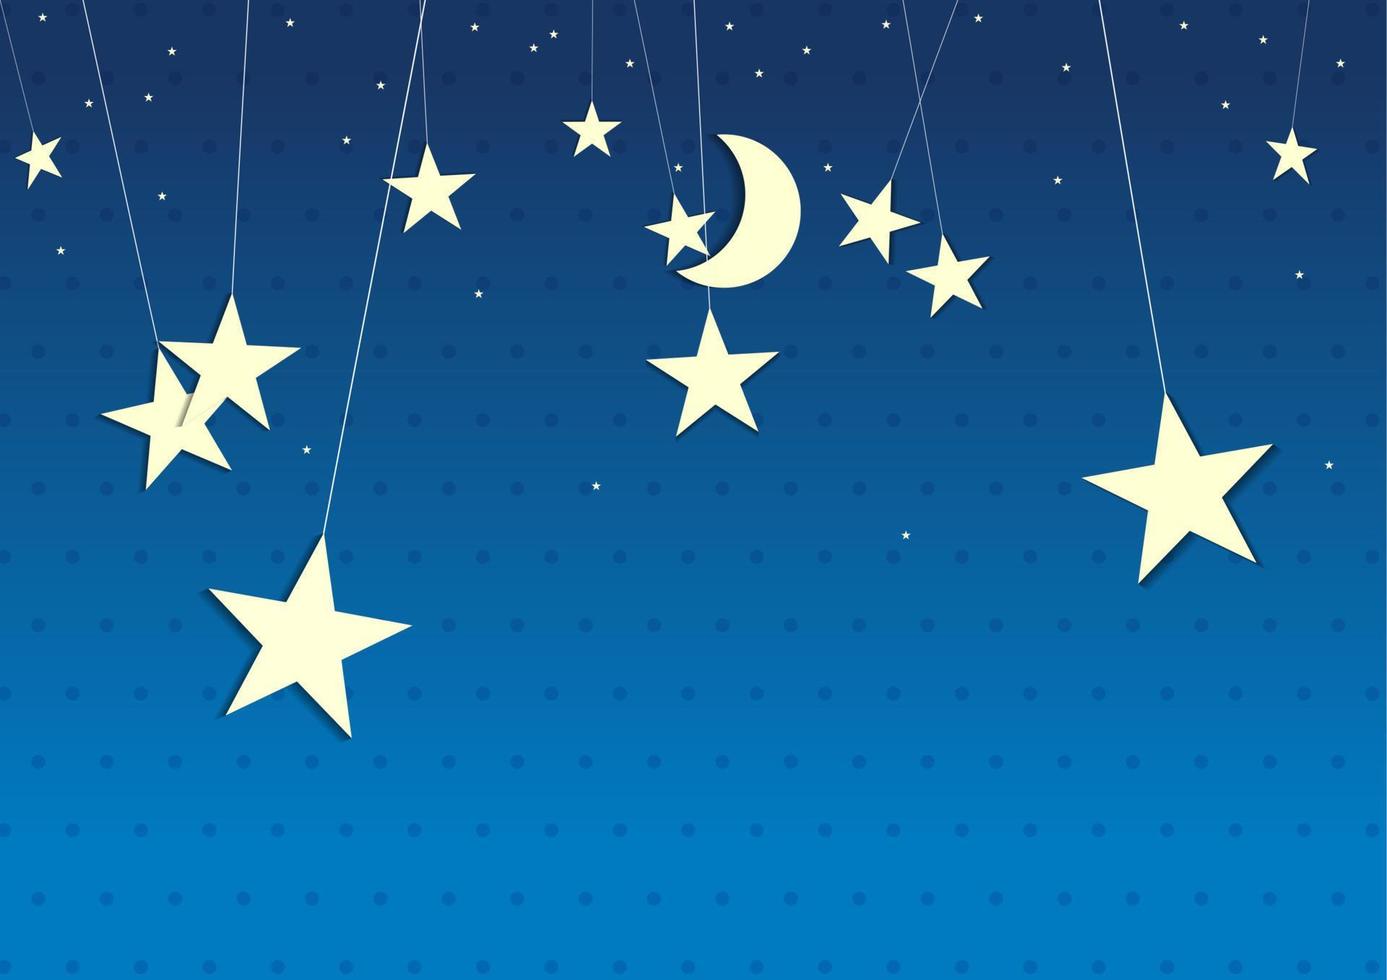 moon and stars cute paper design vector